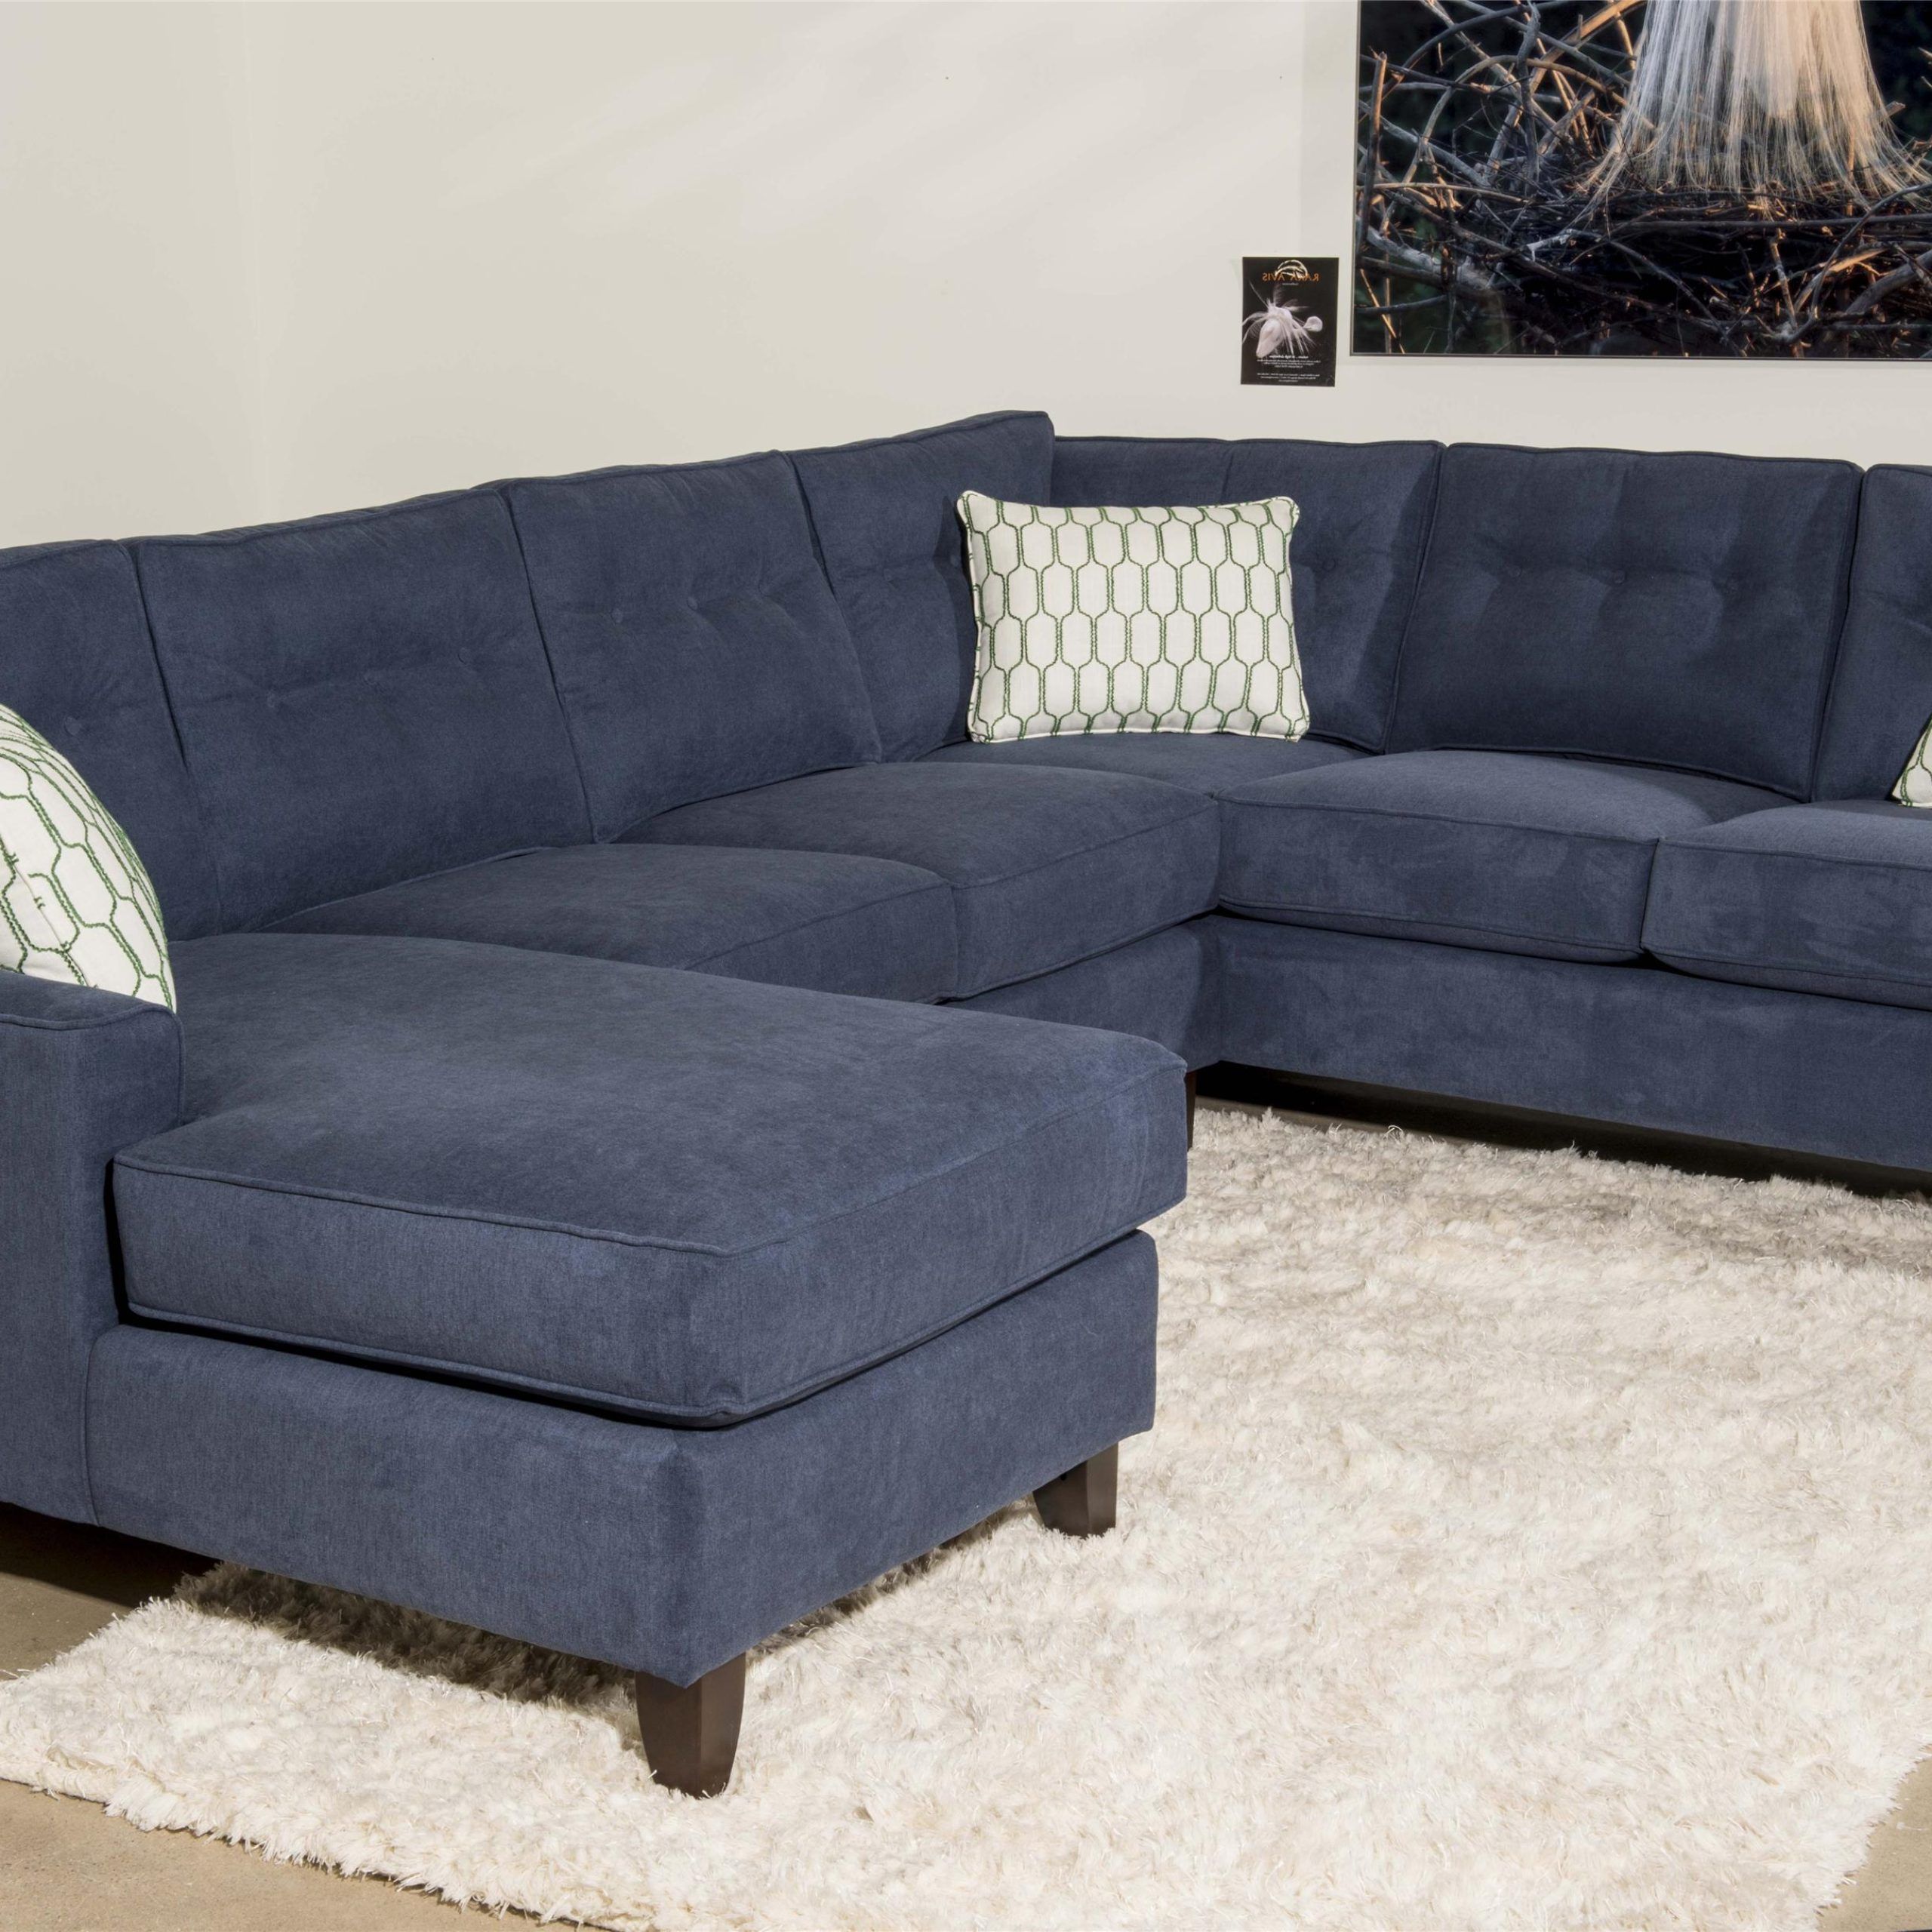 Audrina Contemporary 3 Piece Sectional Sofa With Chaiseklaussner With 3 Piece Leather Sectional Sofa Sets (Gallery 13 of 20)